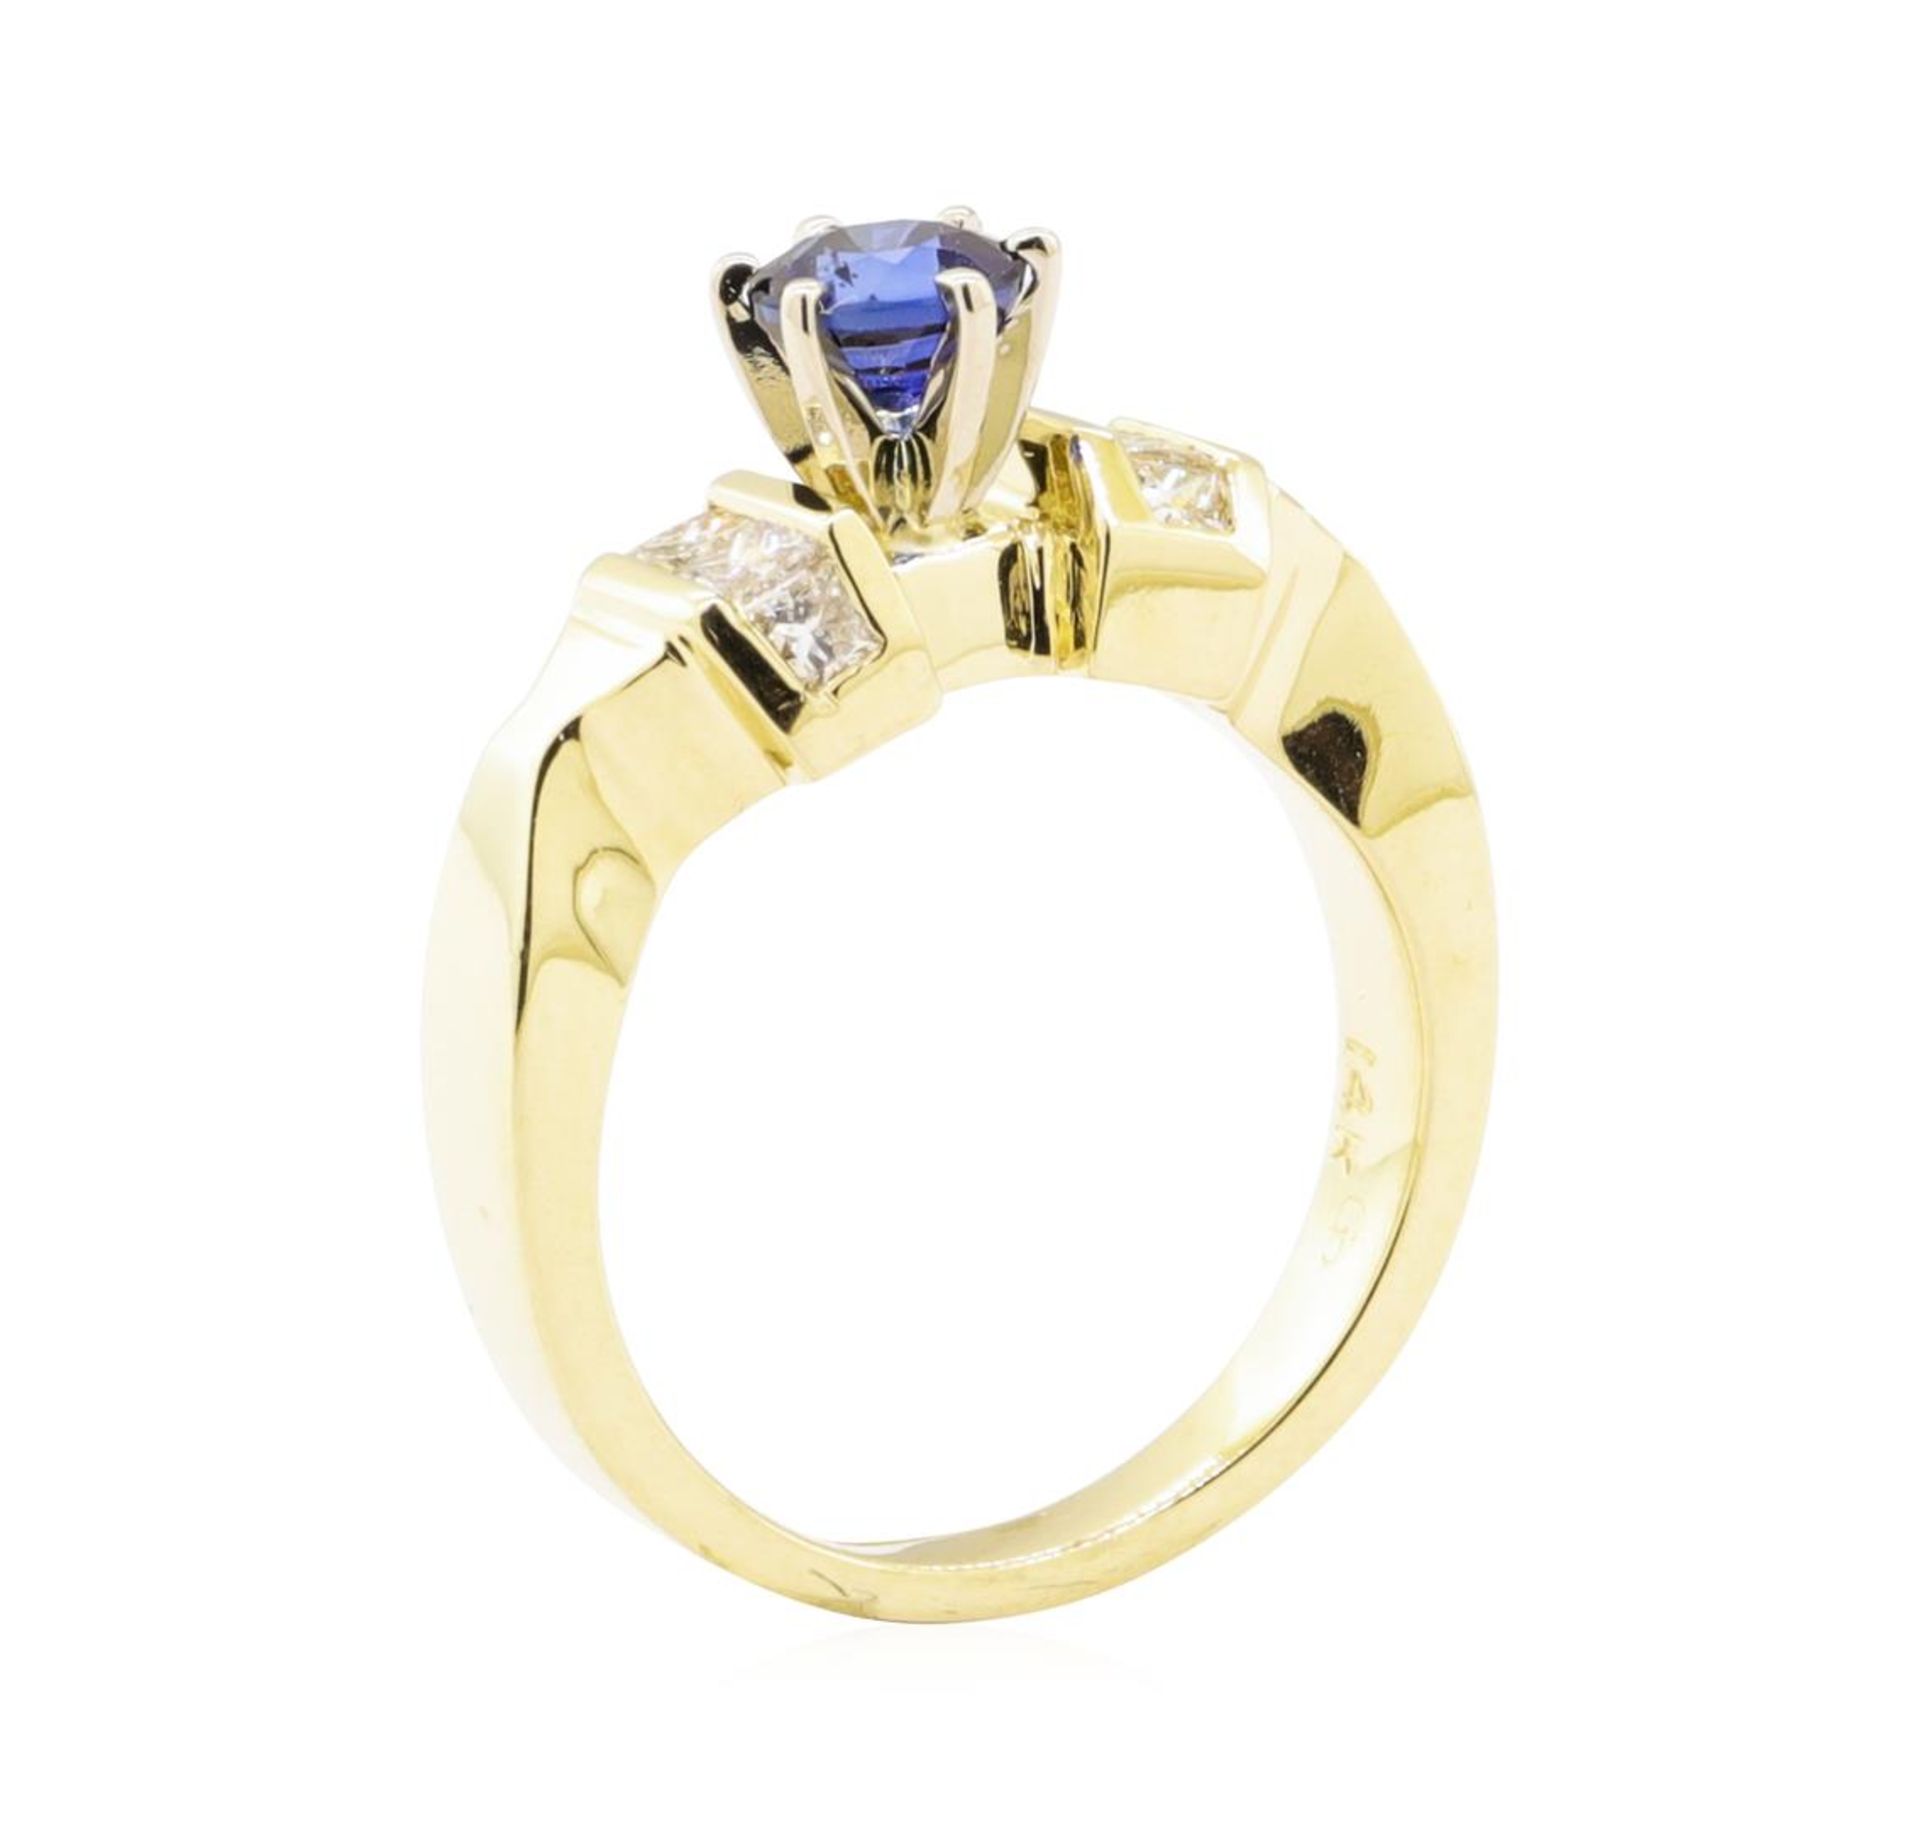 1.18 ctw Blue Sapphire and Diamond Ring - 14KT Yellow Gold - Image 4 of 4